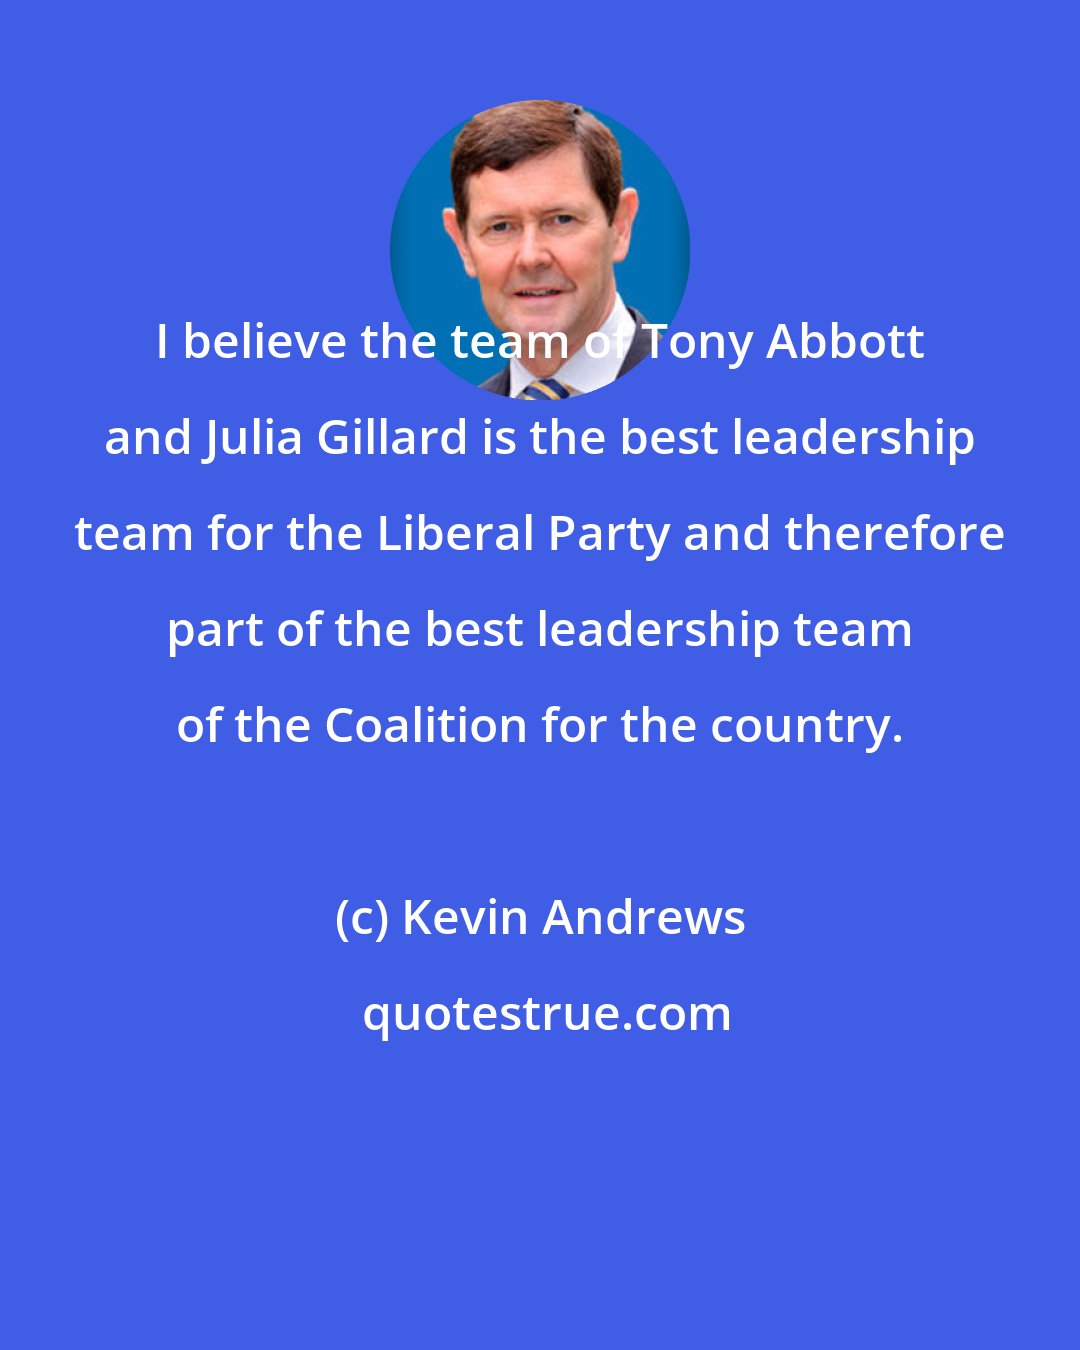 Kevin Andrews: I believe the team of Tony Abbott and Julia Gillard is the best leadership team for the Liberal Party and therefore part of the best leadership team of the Coalition for the country.